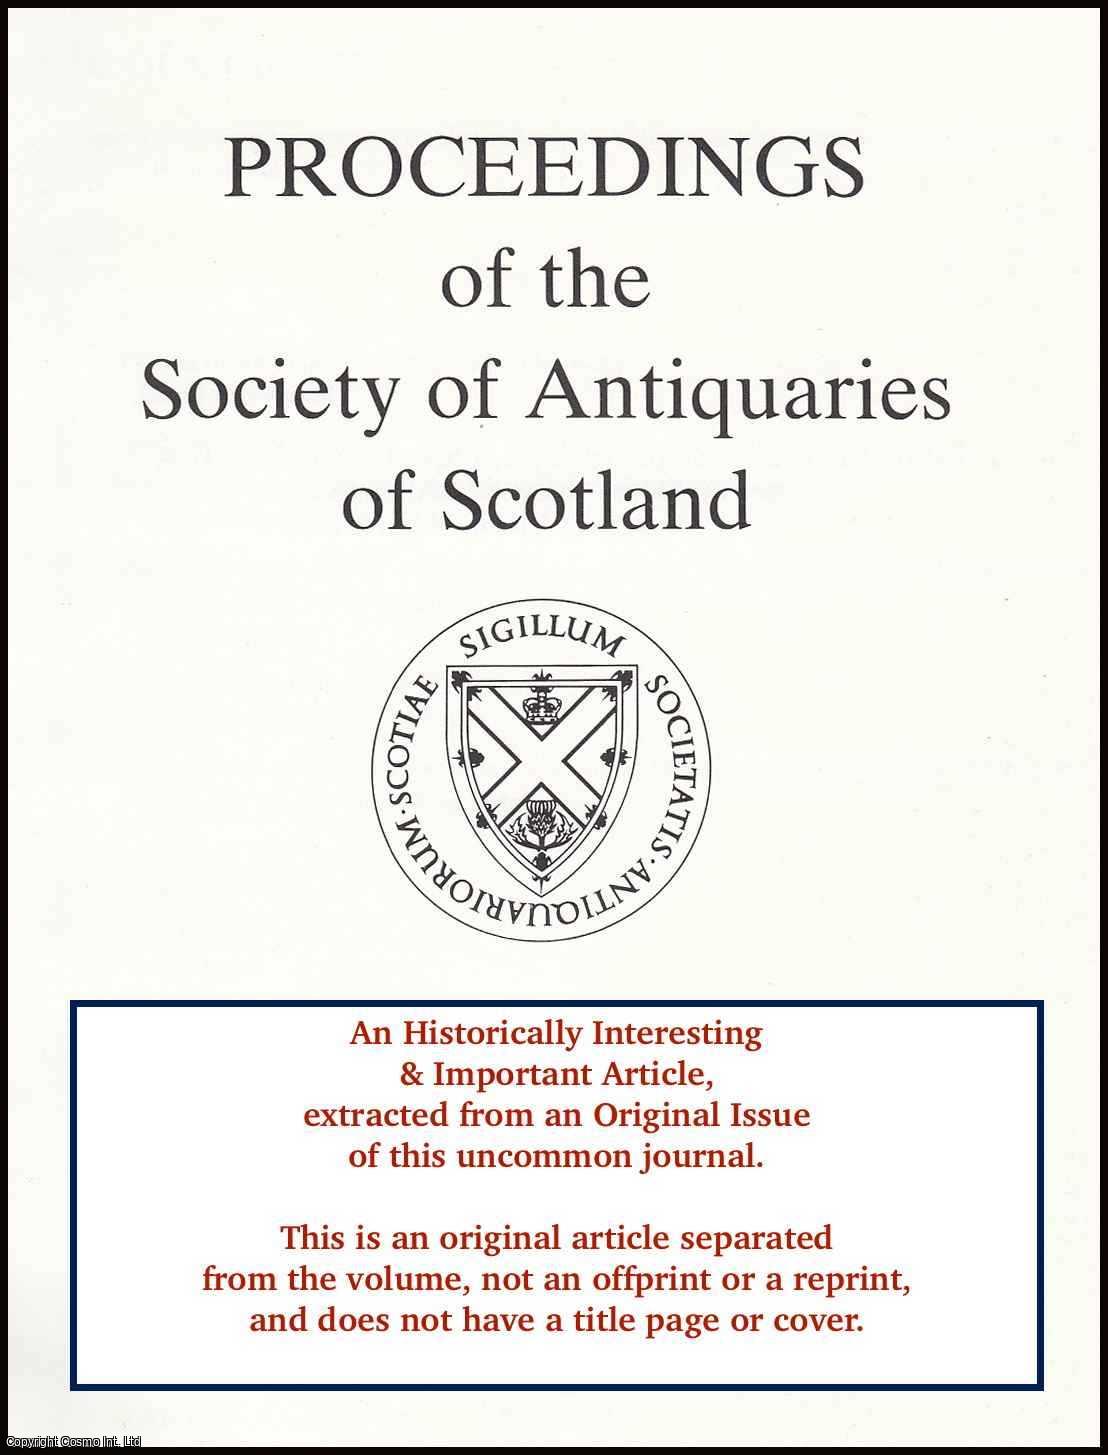 Alexander Hutcheson - The Recent Discovery of Fragments of Ancient Sculptured Crosses at The Cathedral Church, St. Andrews. An original article from the Proceedings of the Society of Antiquaries of Scotland, 1891-92.